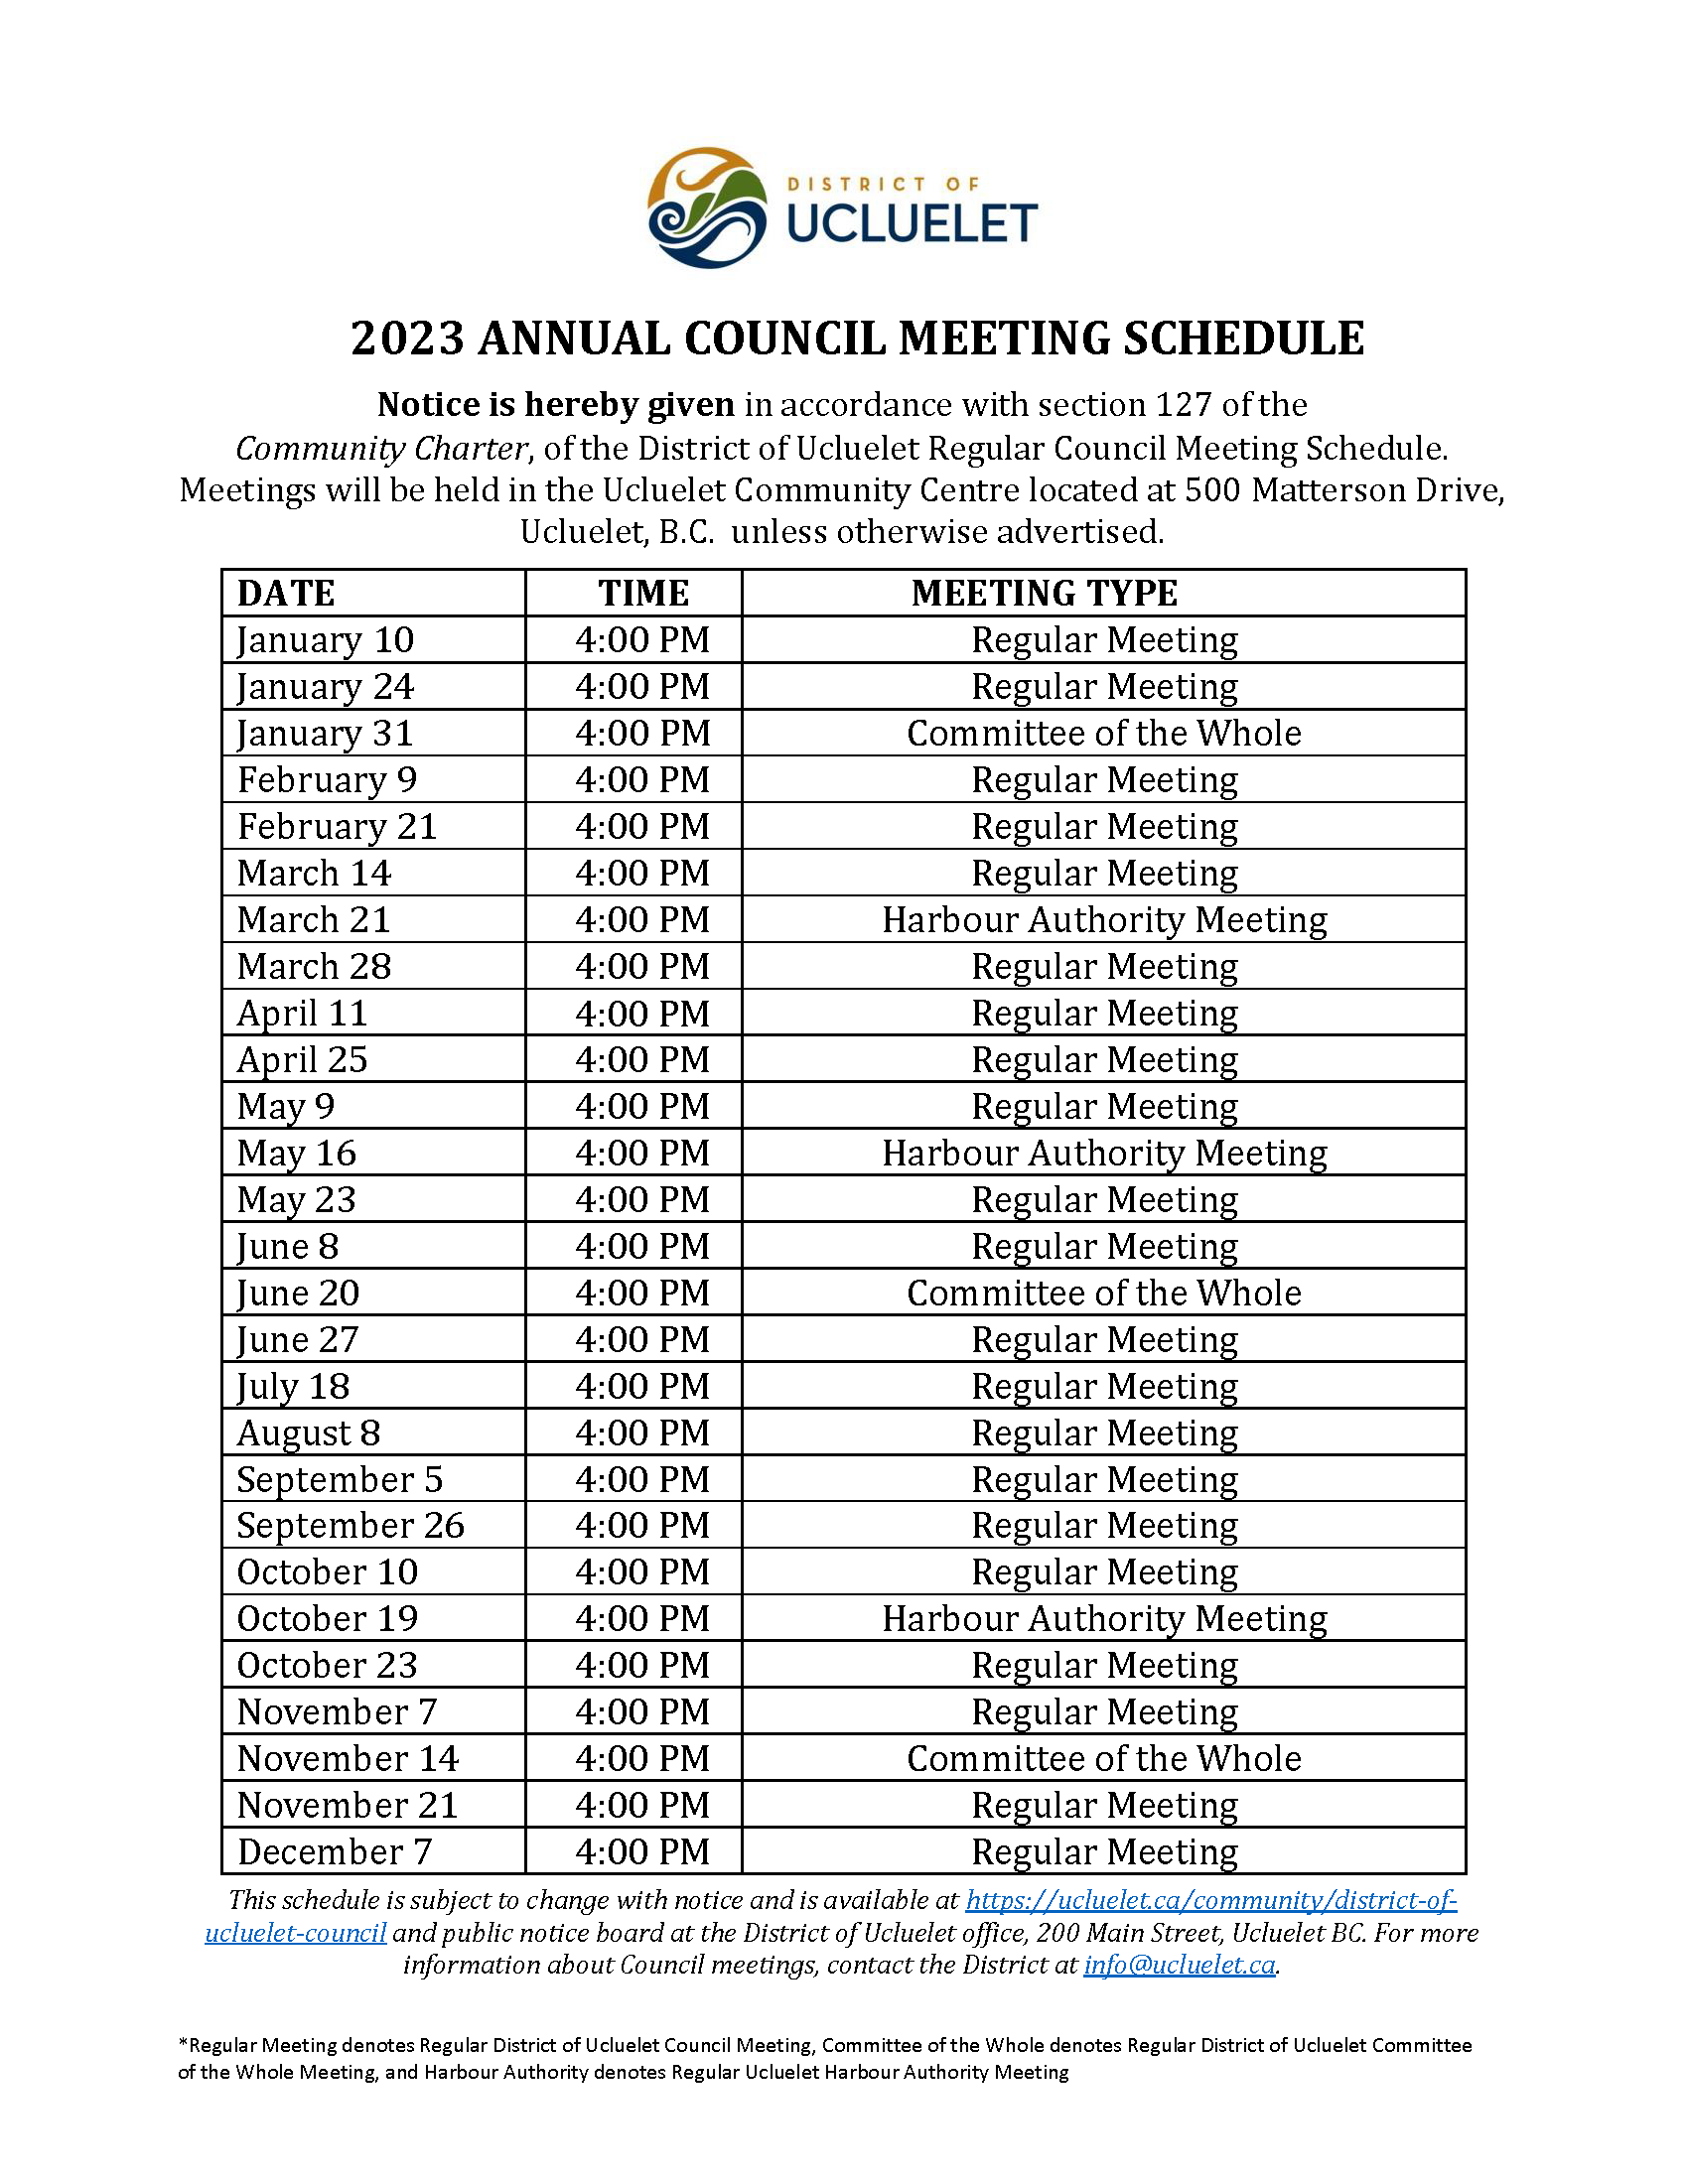 2023_Council_Meeting_Schedule_-_Notice.png